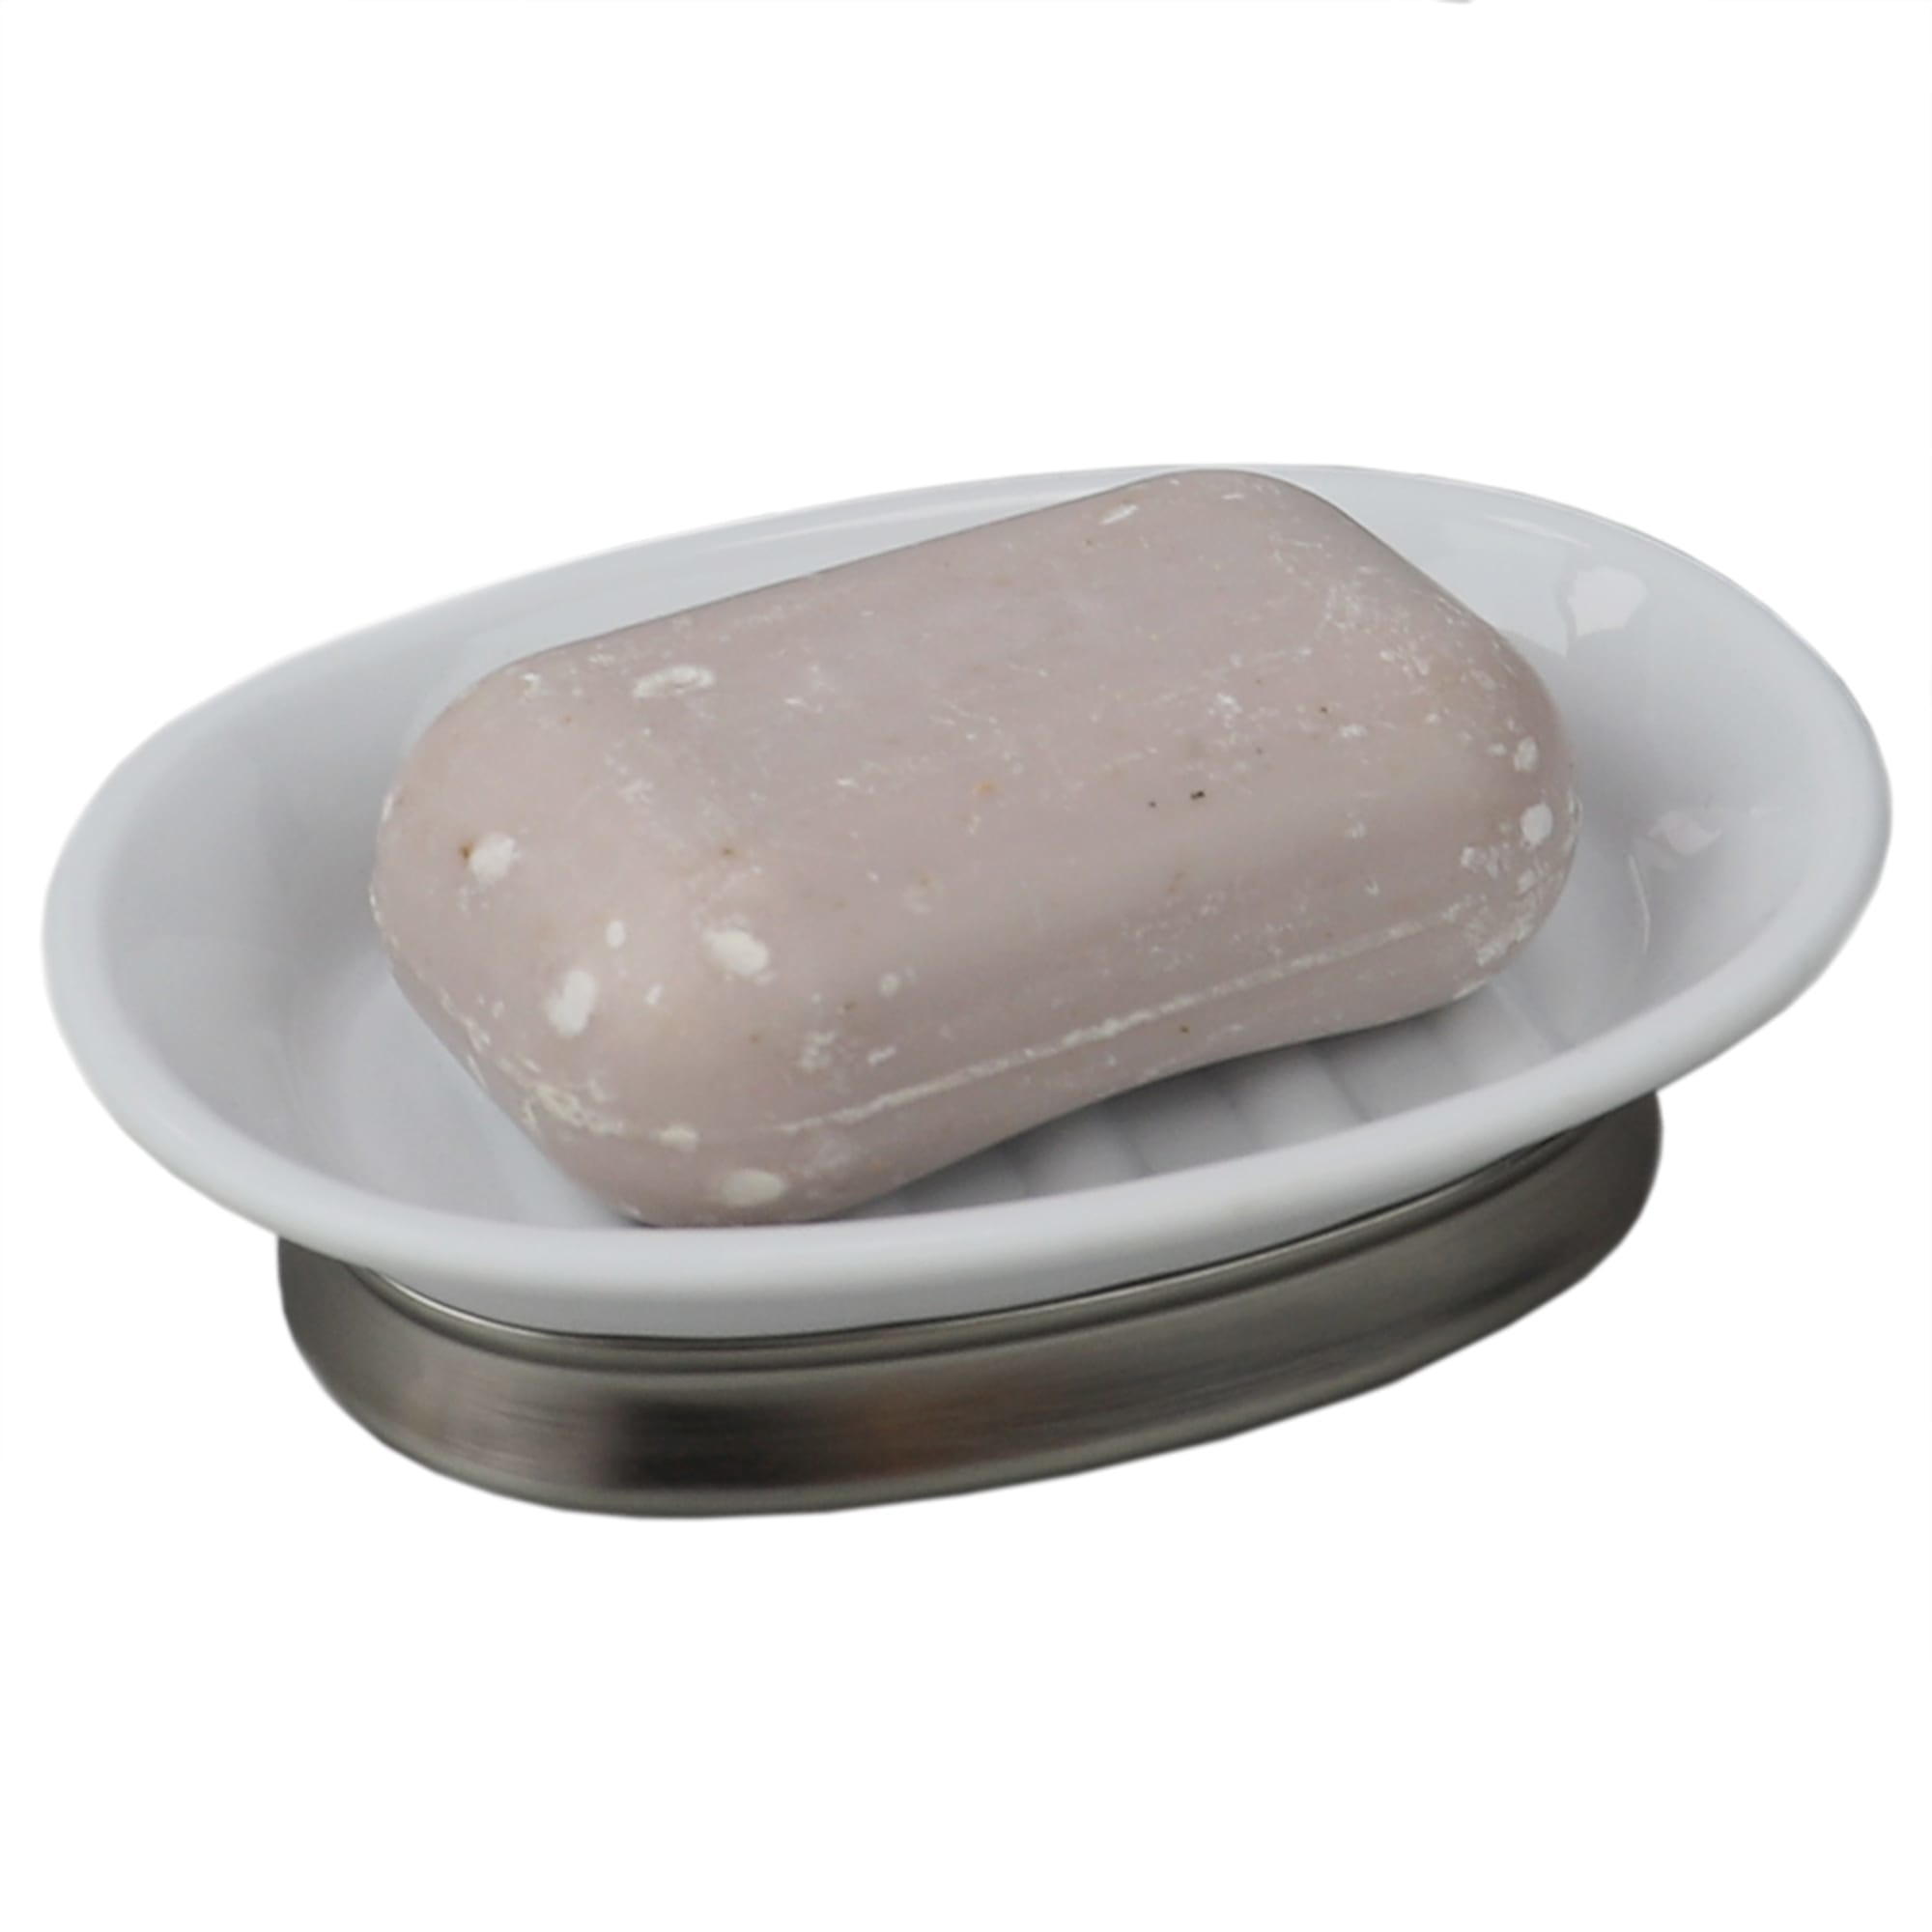 Home Basics Pedestal Soap Dish With Non-Skid Metal Base, White $3.00 EACH, CASE PACK OF 12